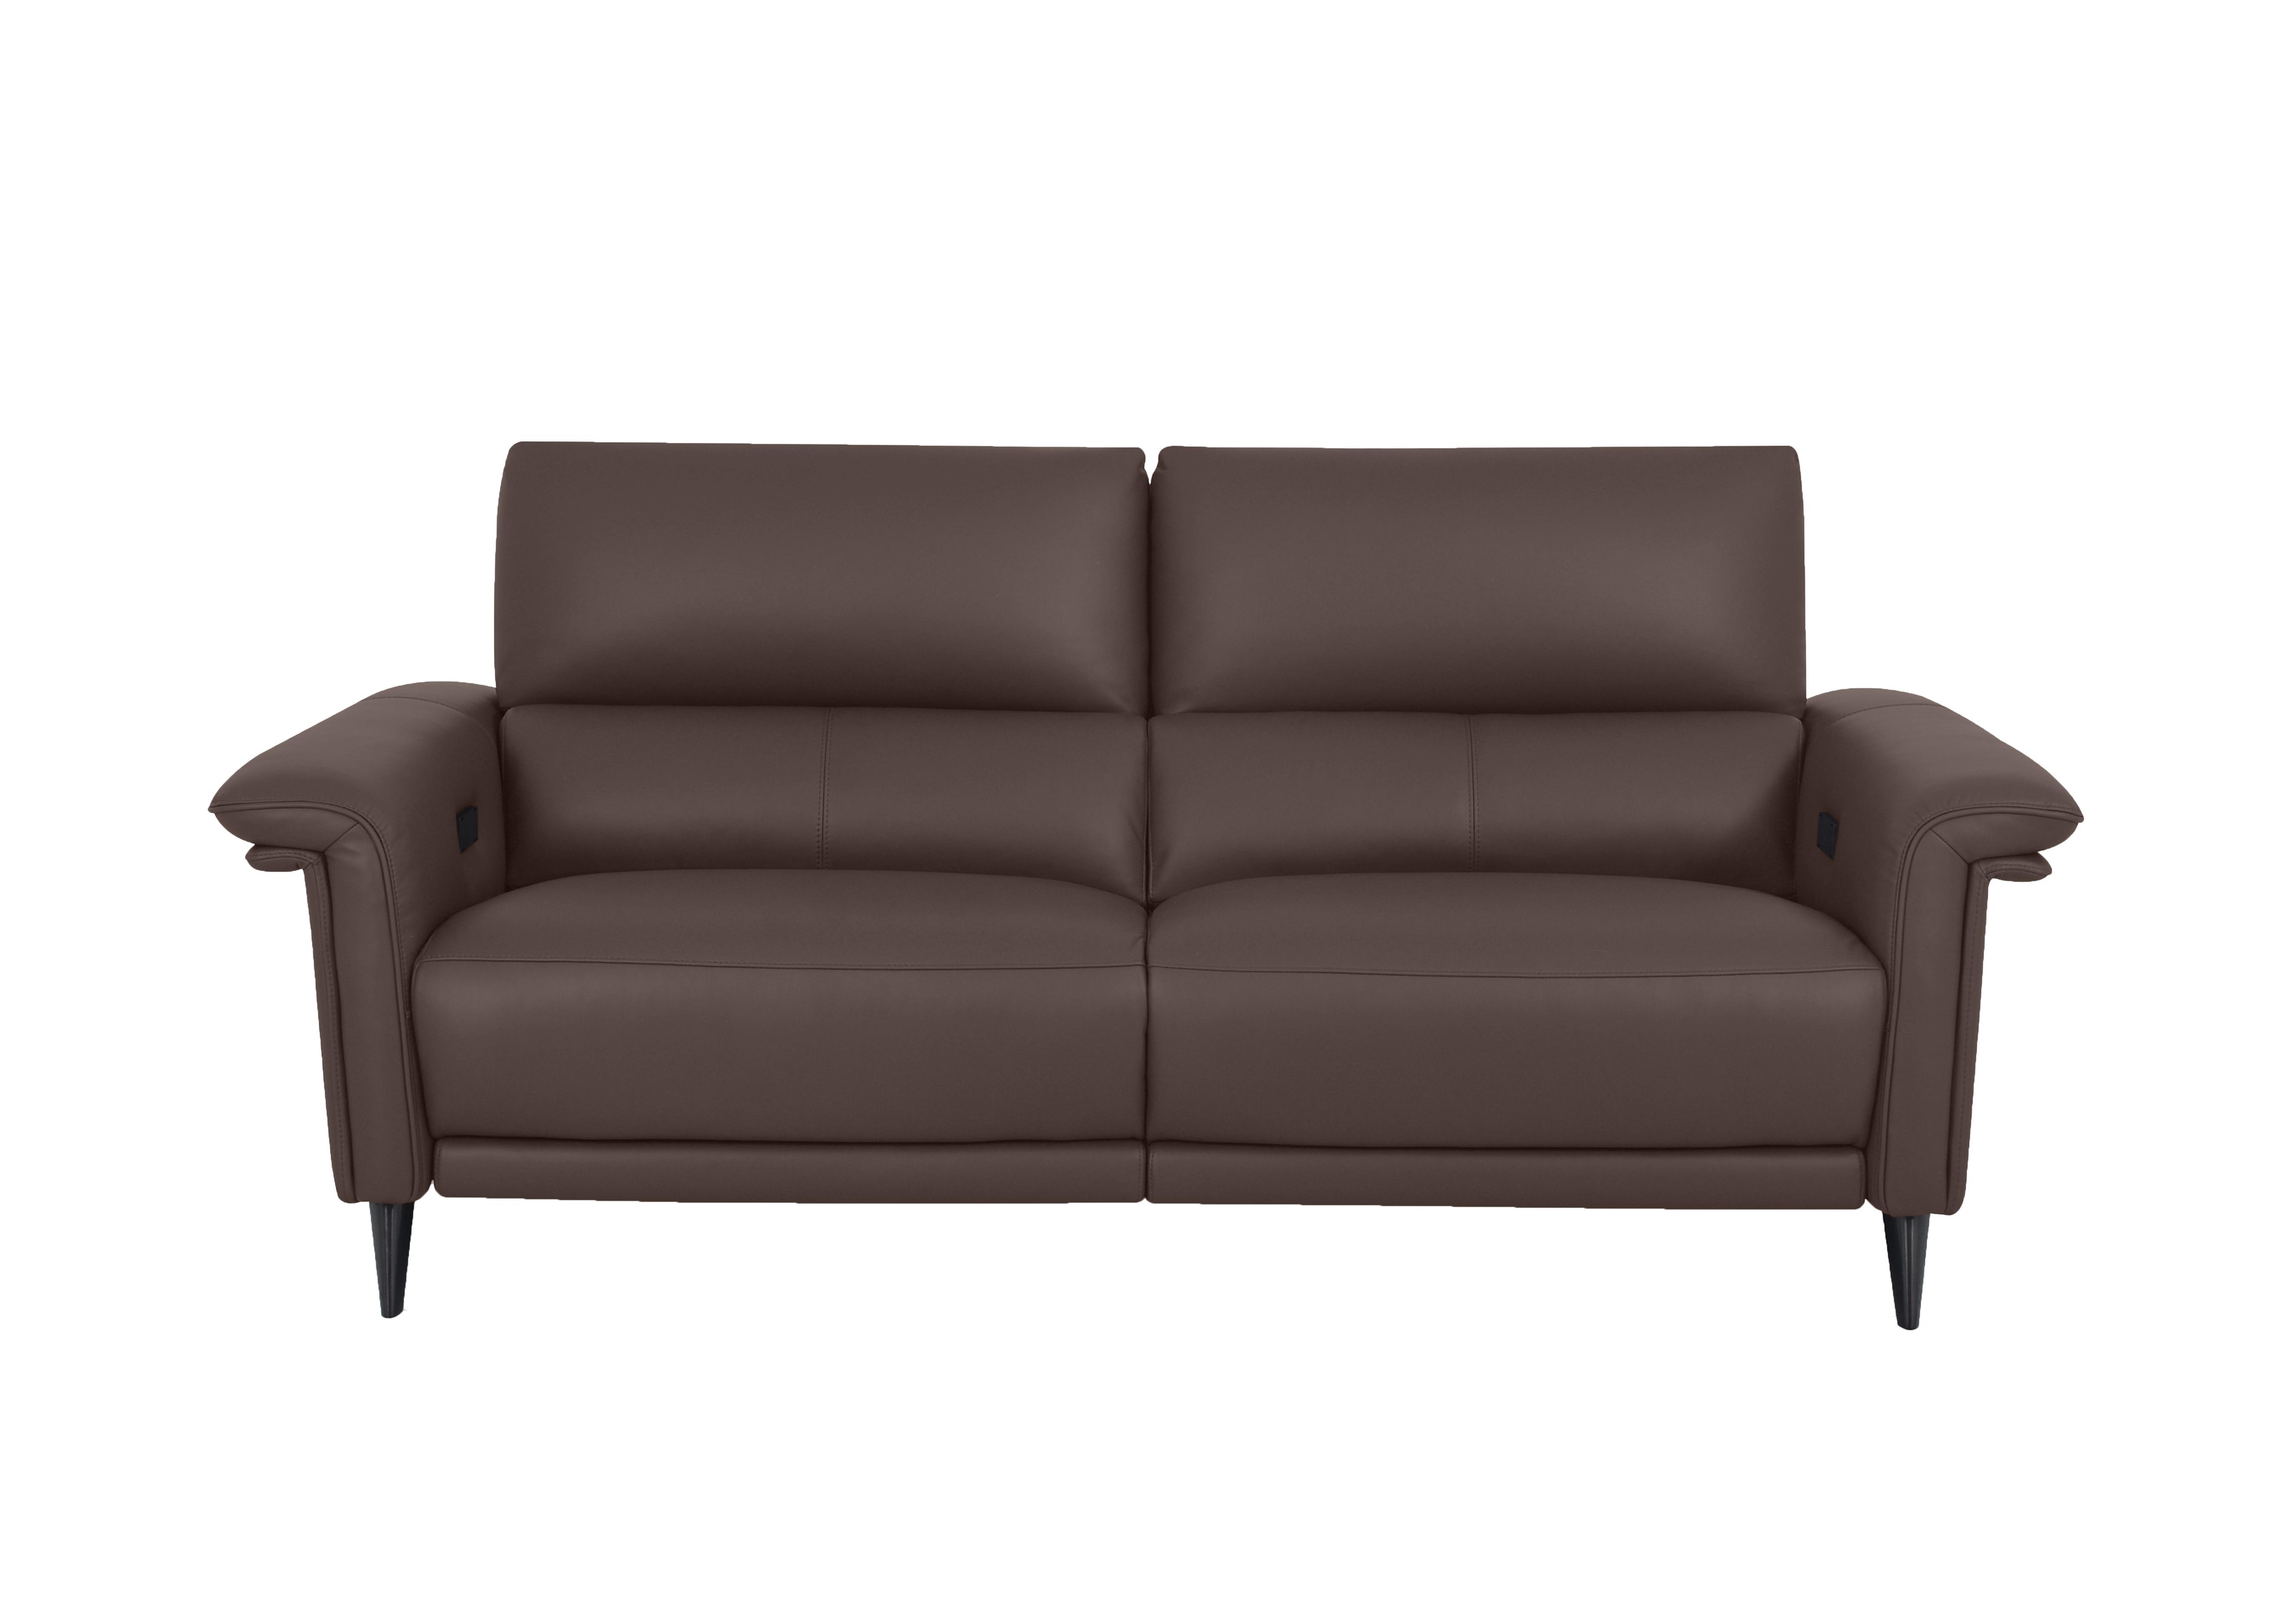 Huxley 3 Seater Leather Sofa in Nn-512e Cacao Brown on Furniture Village